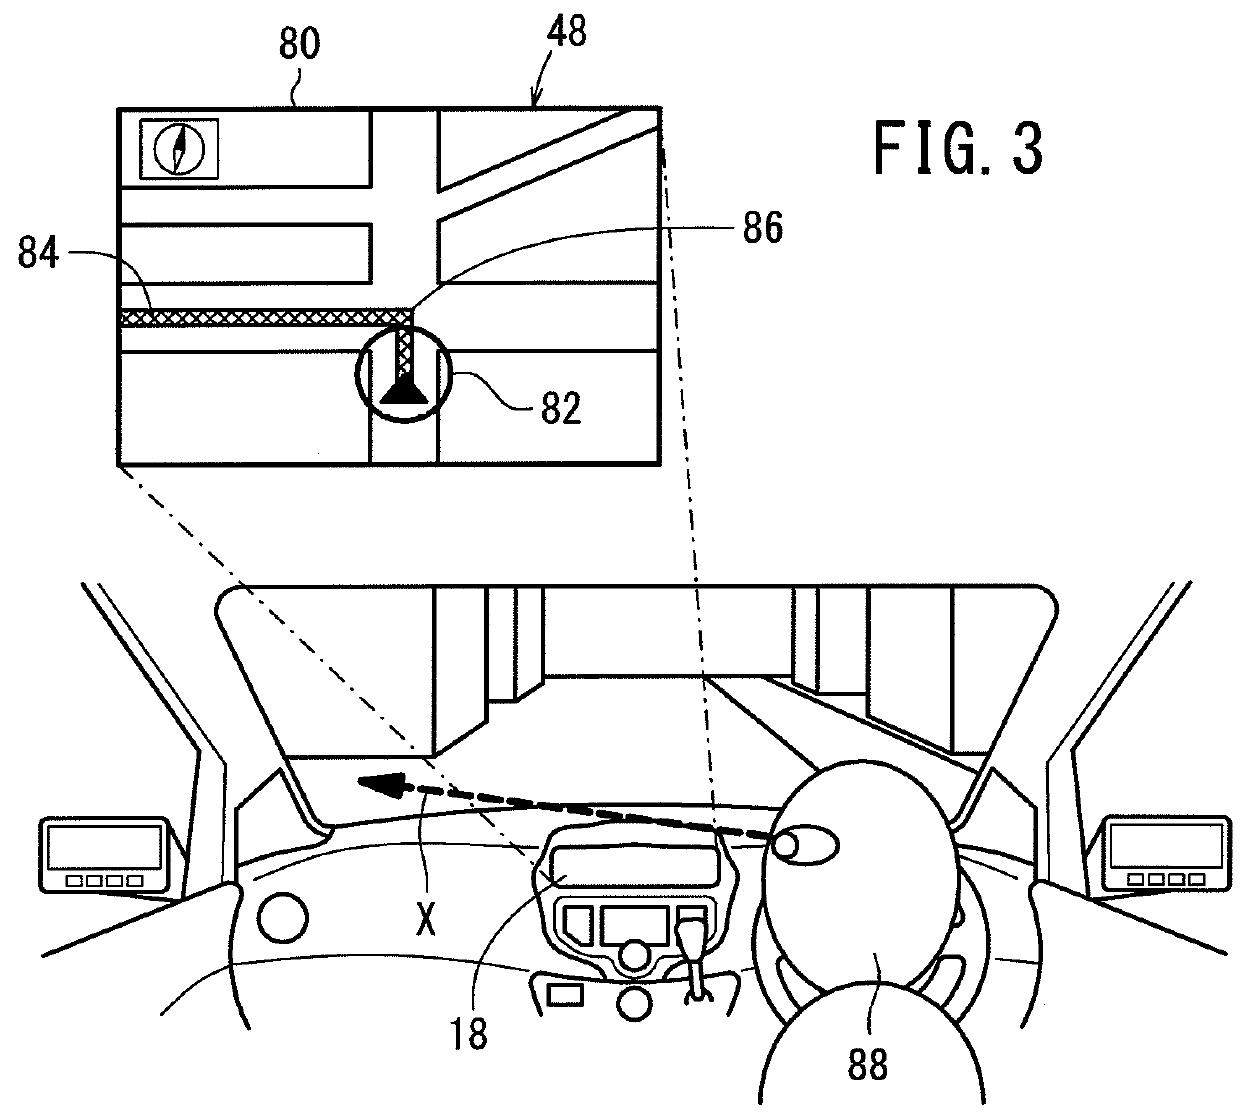 Visually-distracted-driving detection device